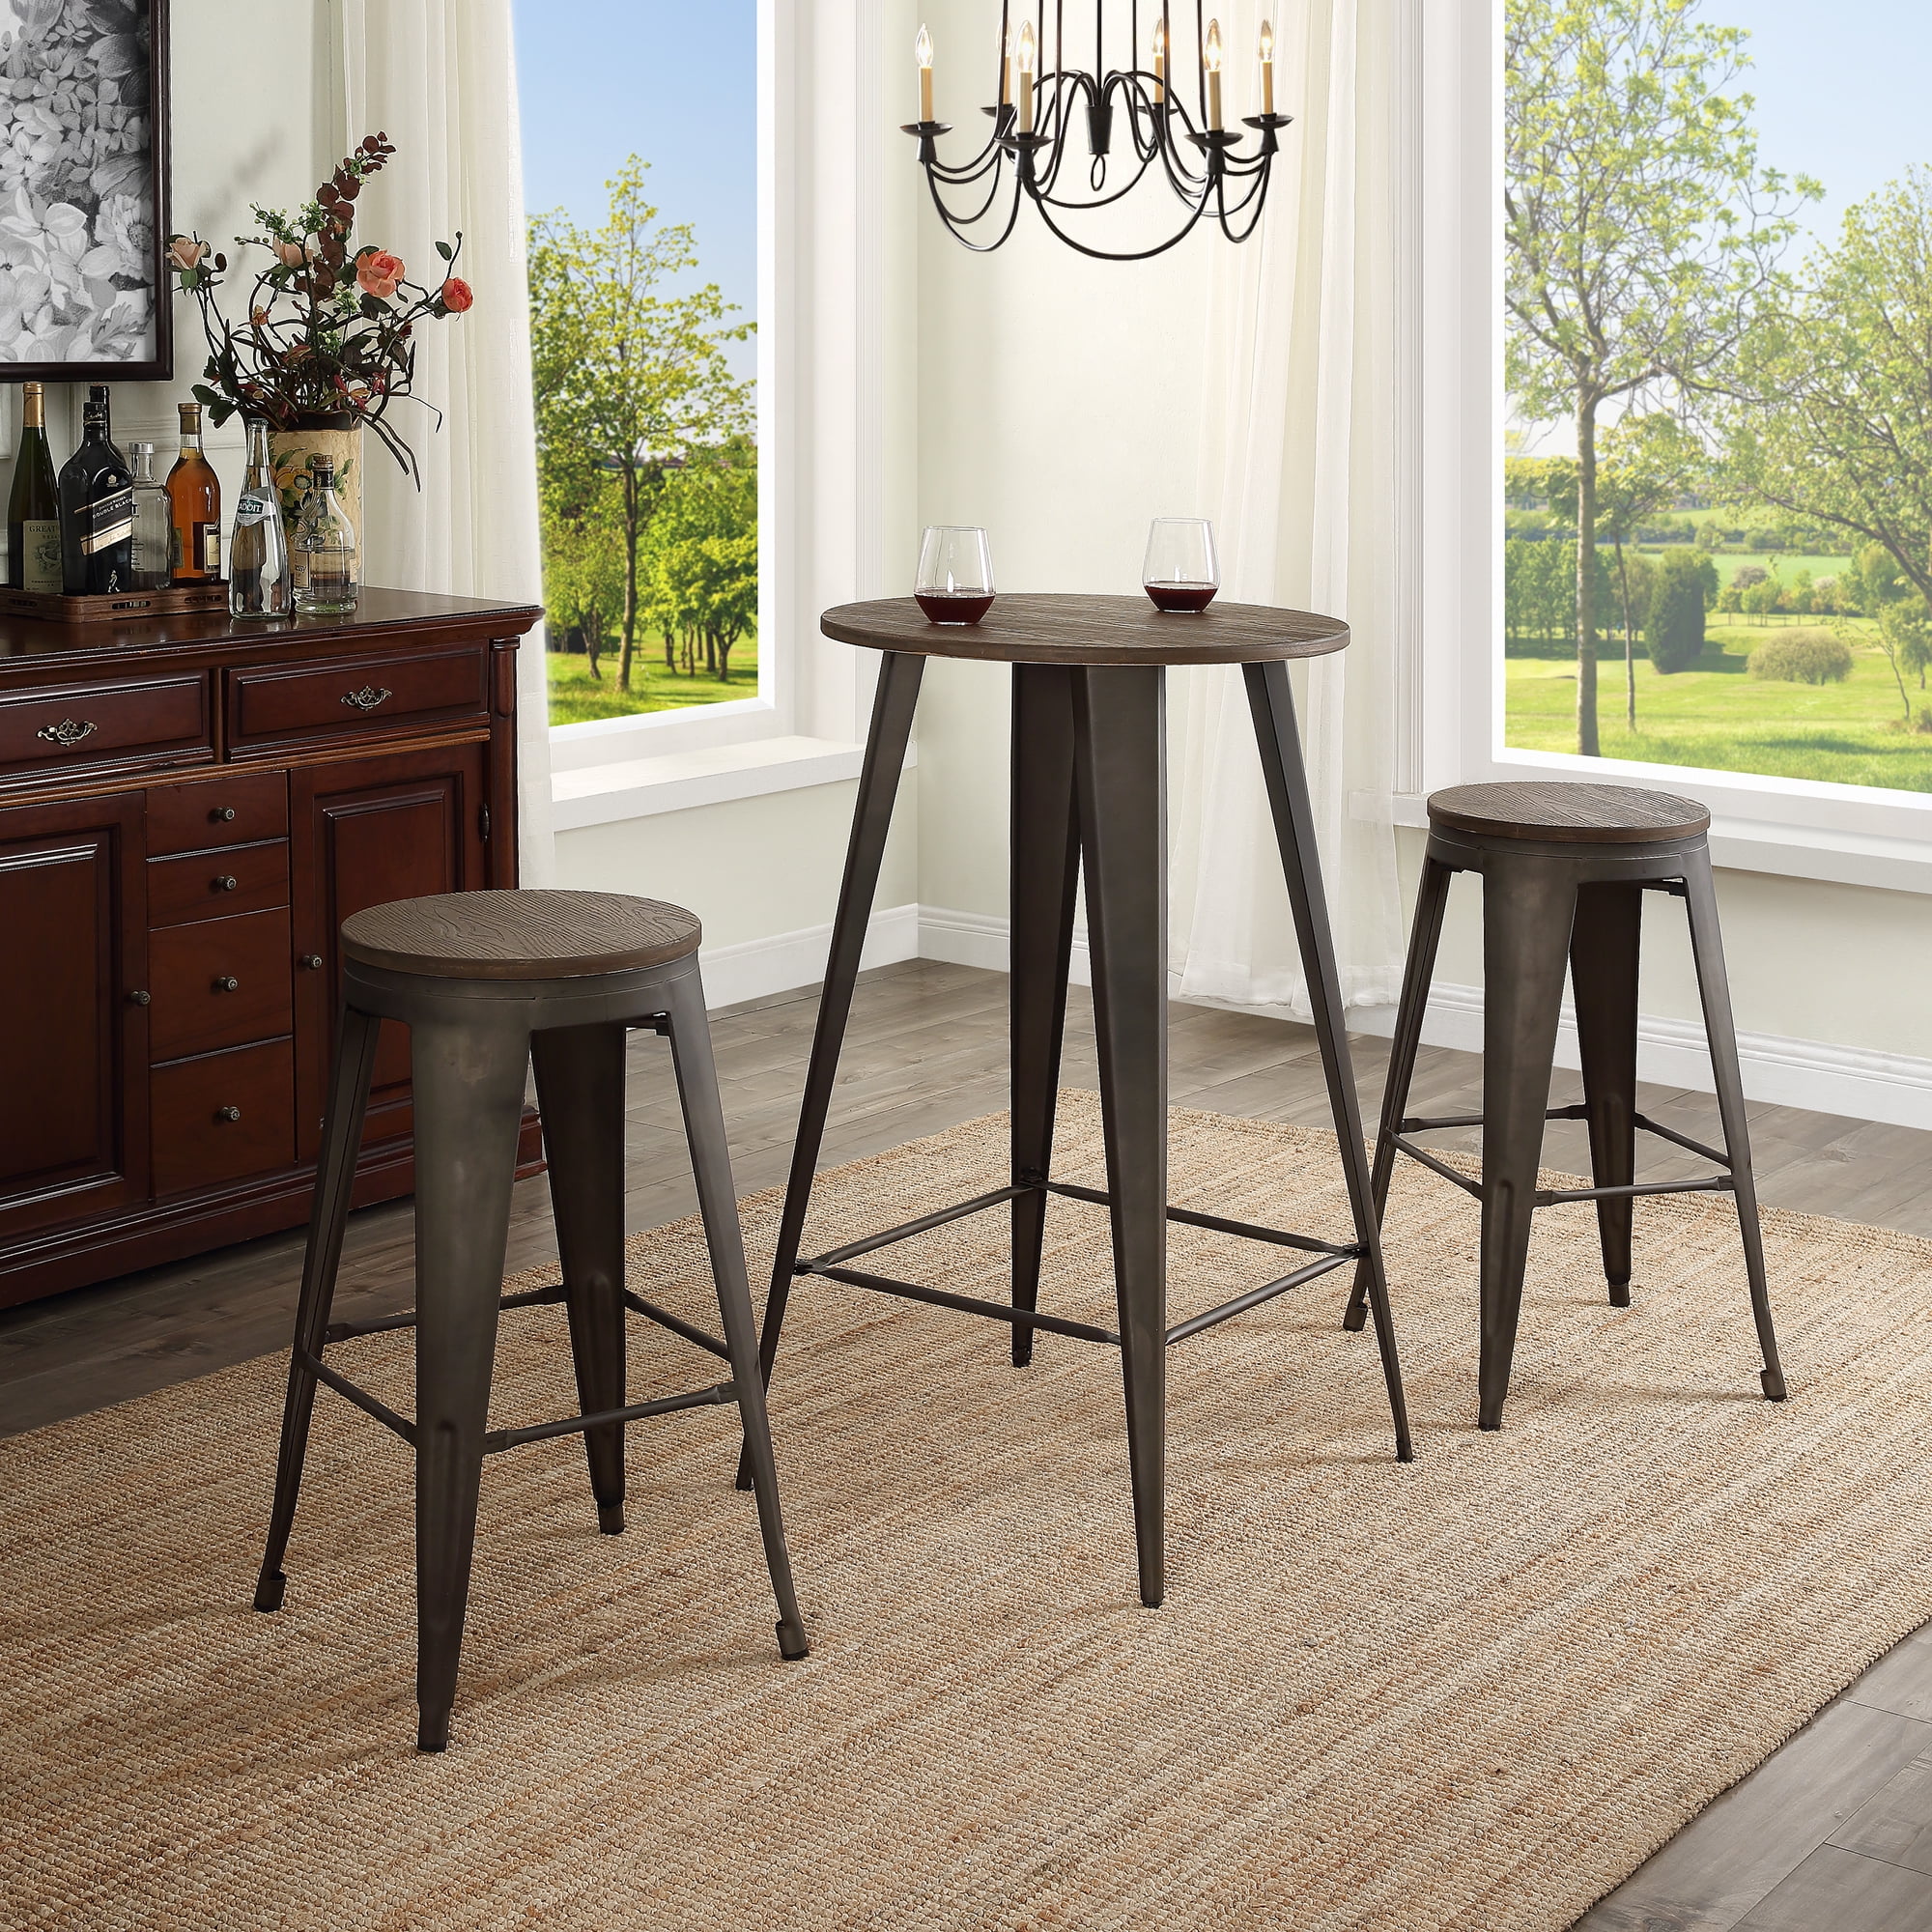 Dining Table Set With 2 Bar Stools, Small Round Bar Height Table Set